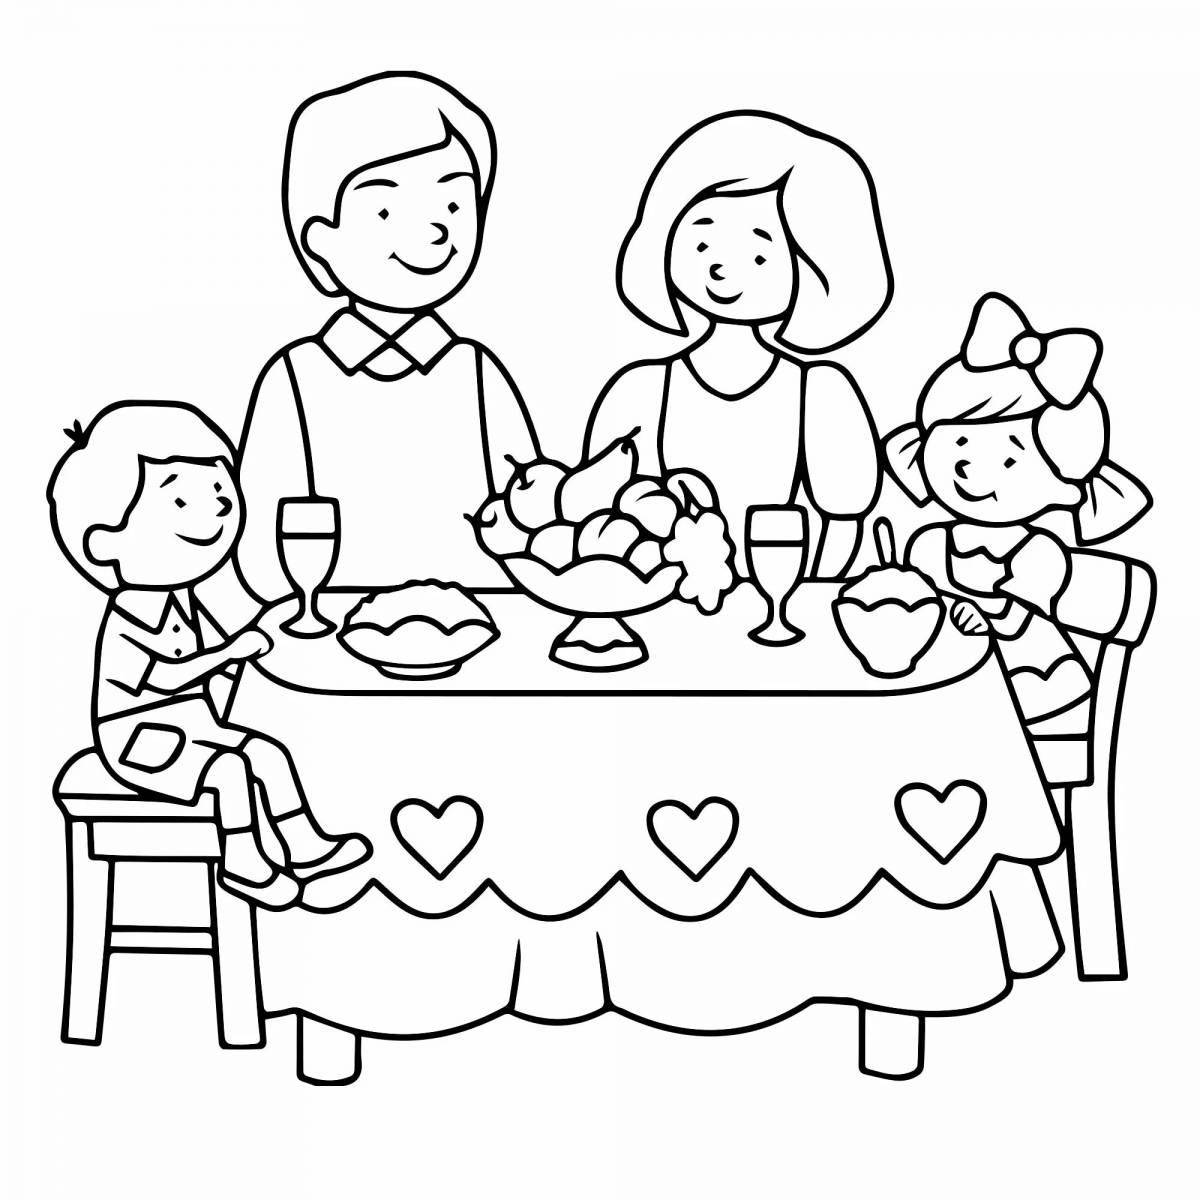 Colorful family coloring book for children 6-7 years old